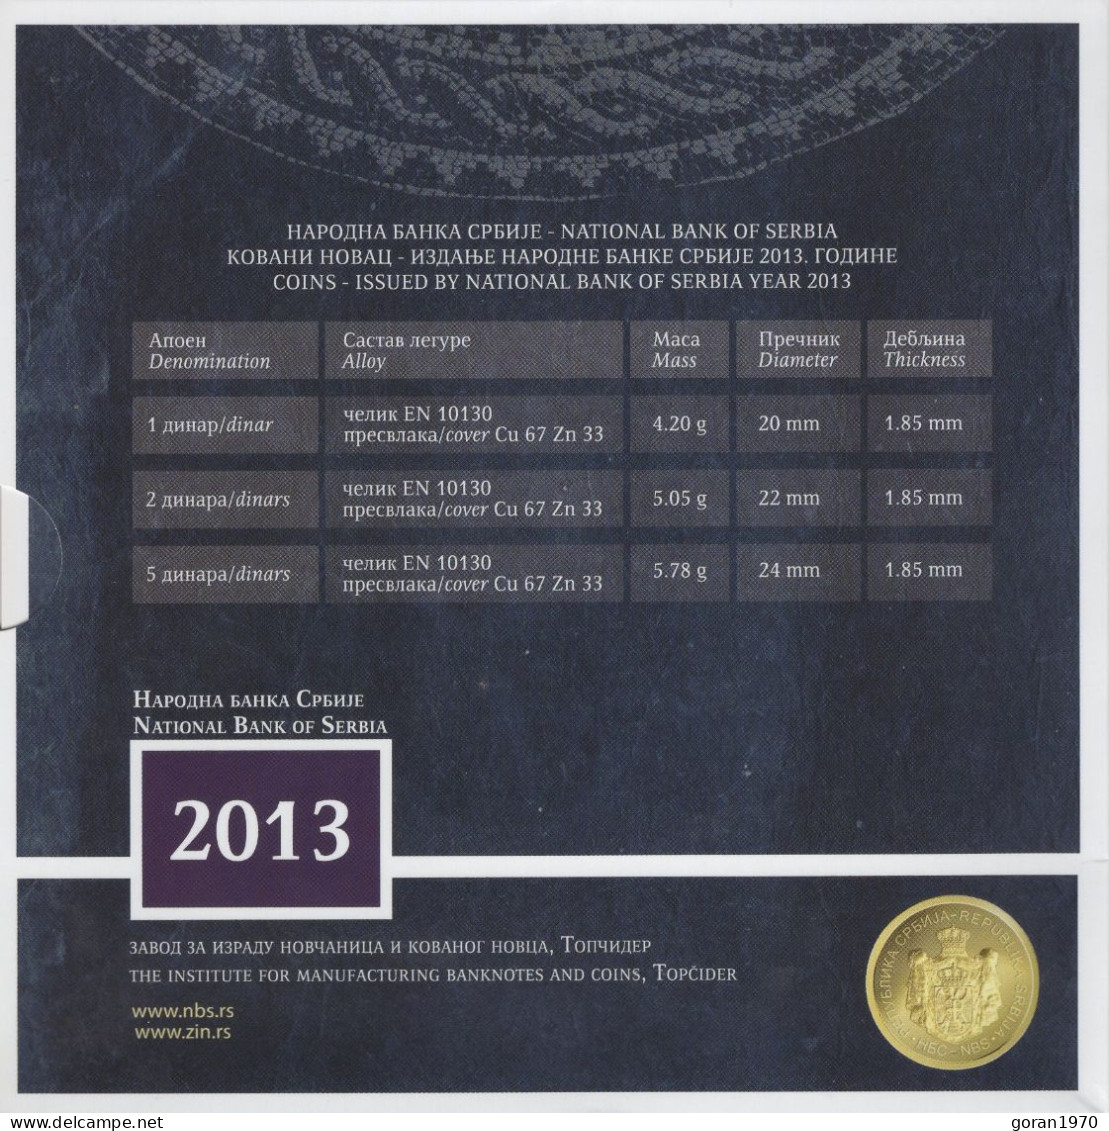 Serbia Coins Set 2013. UNC, NBS, 17 Centuries Of The Edict Of Milan 313-2013 - Serbie